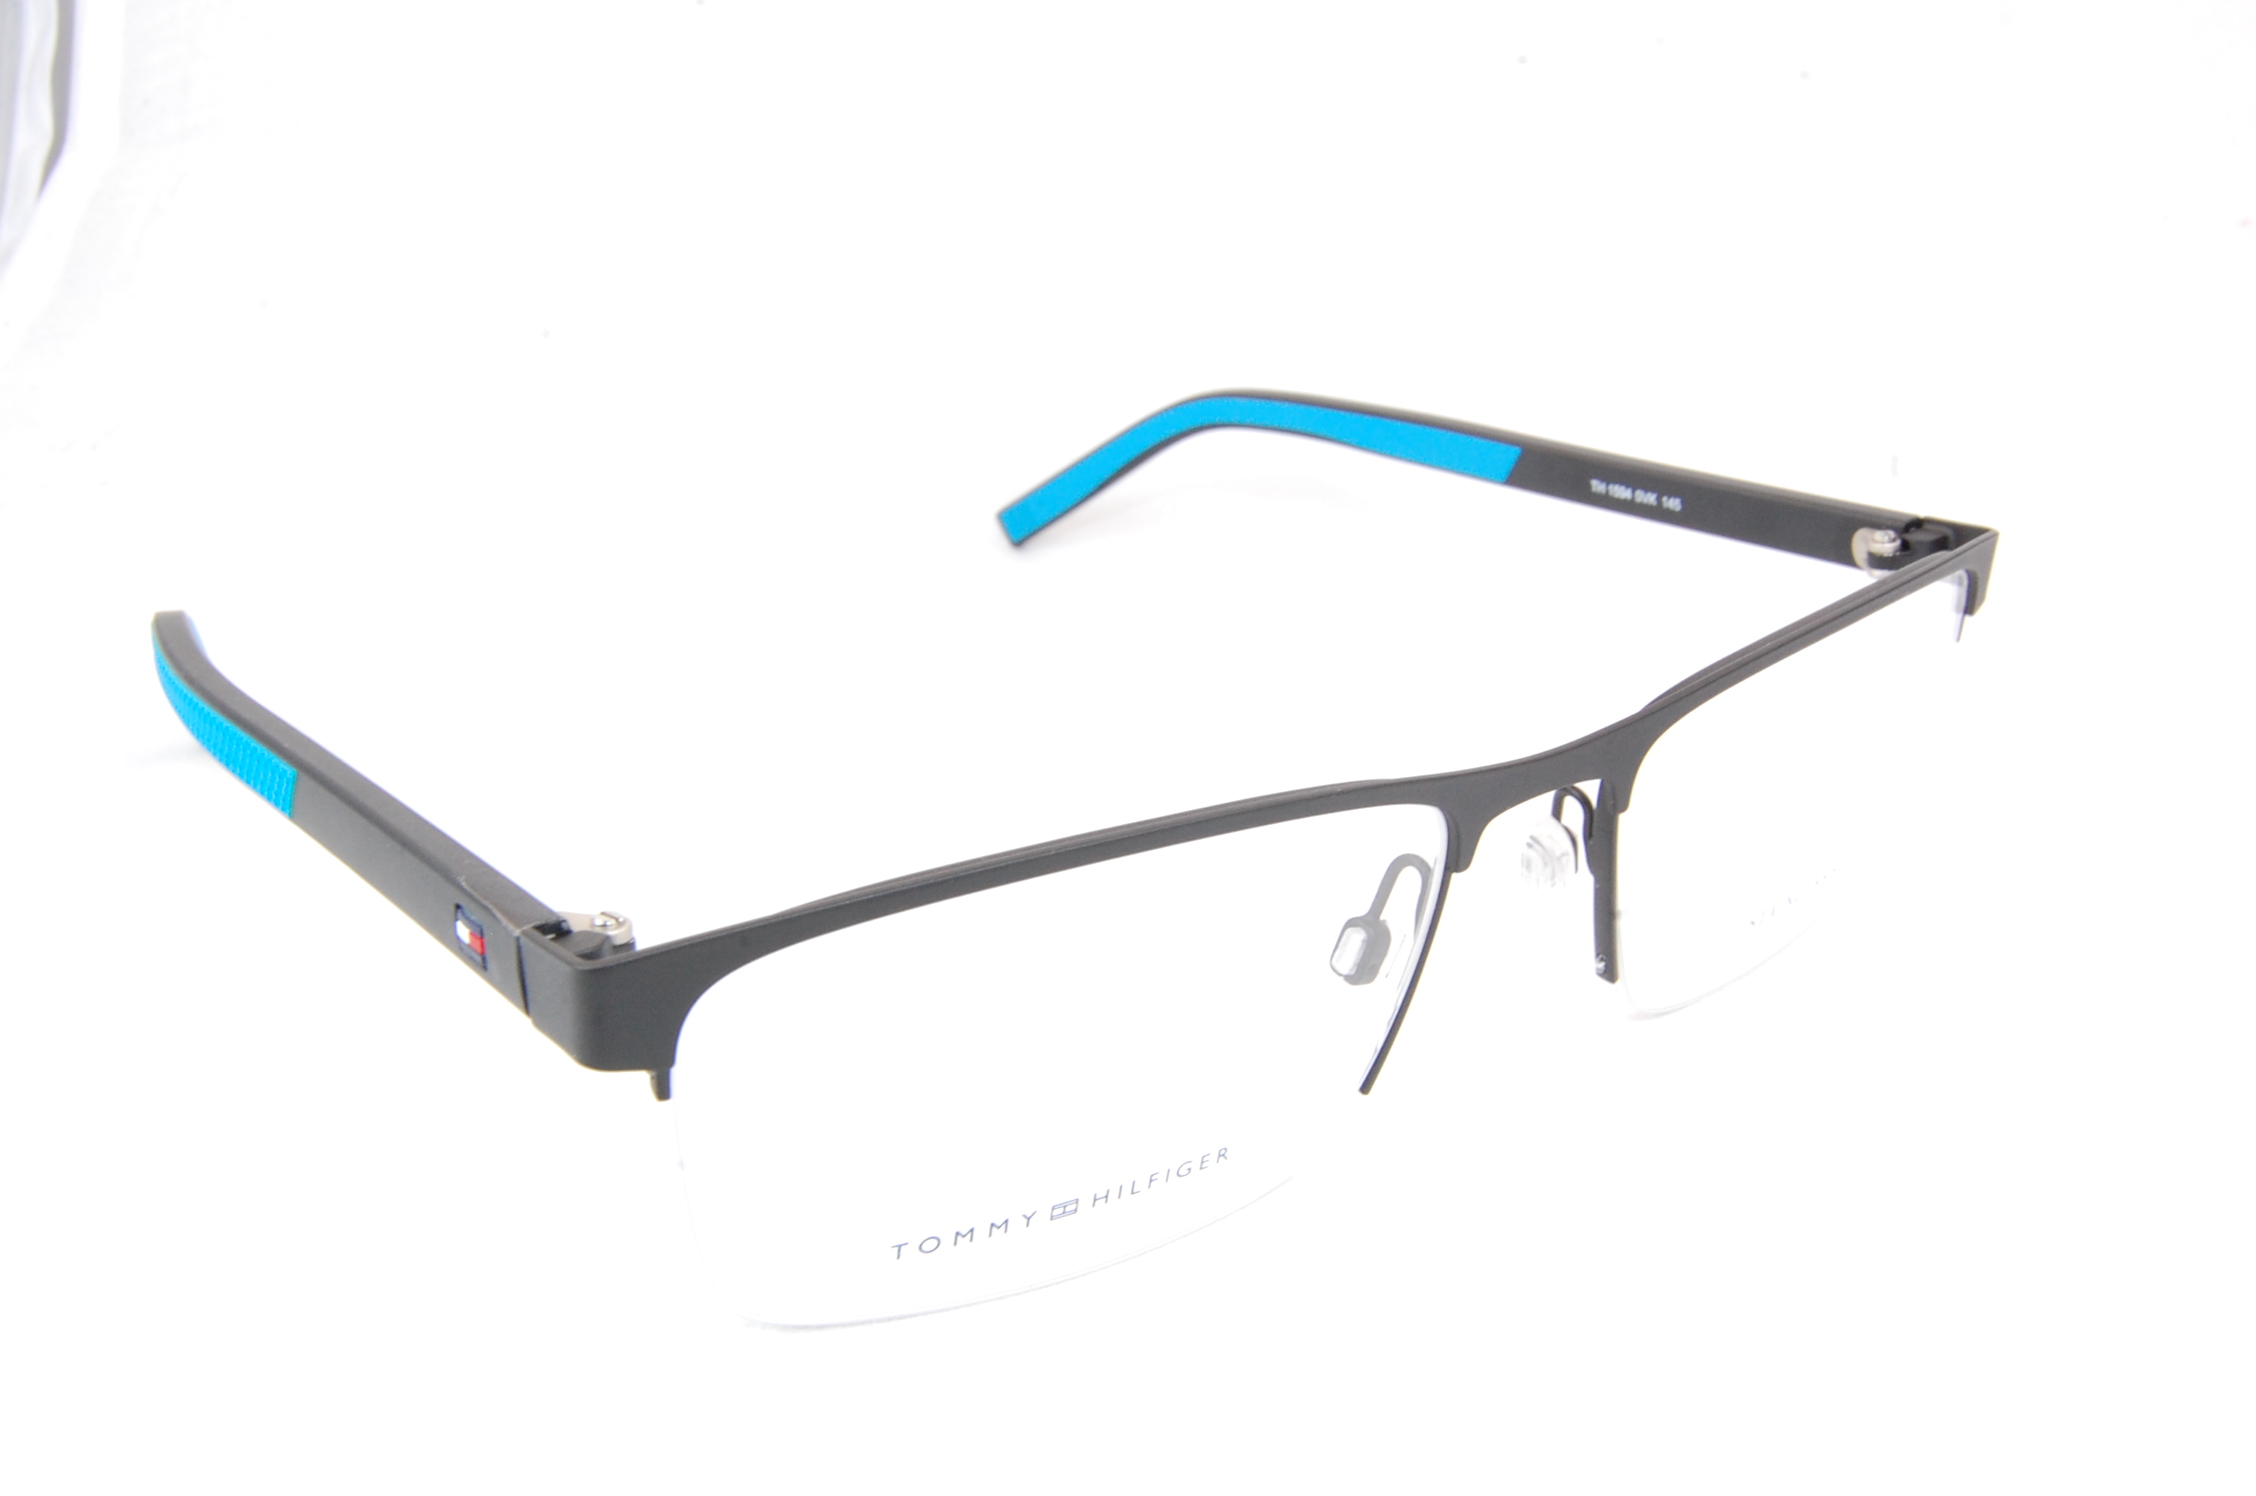 TOMMY HILFIGER OPTIQUE 10/10 FACHES THUMESNIL